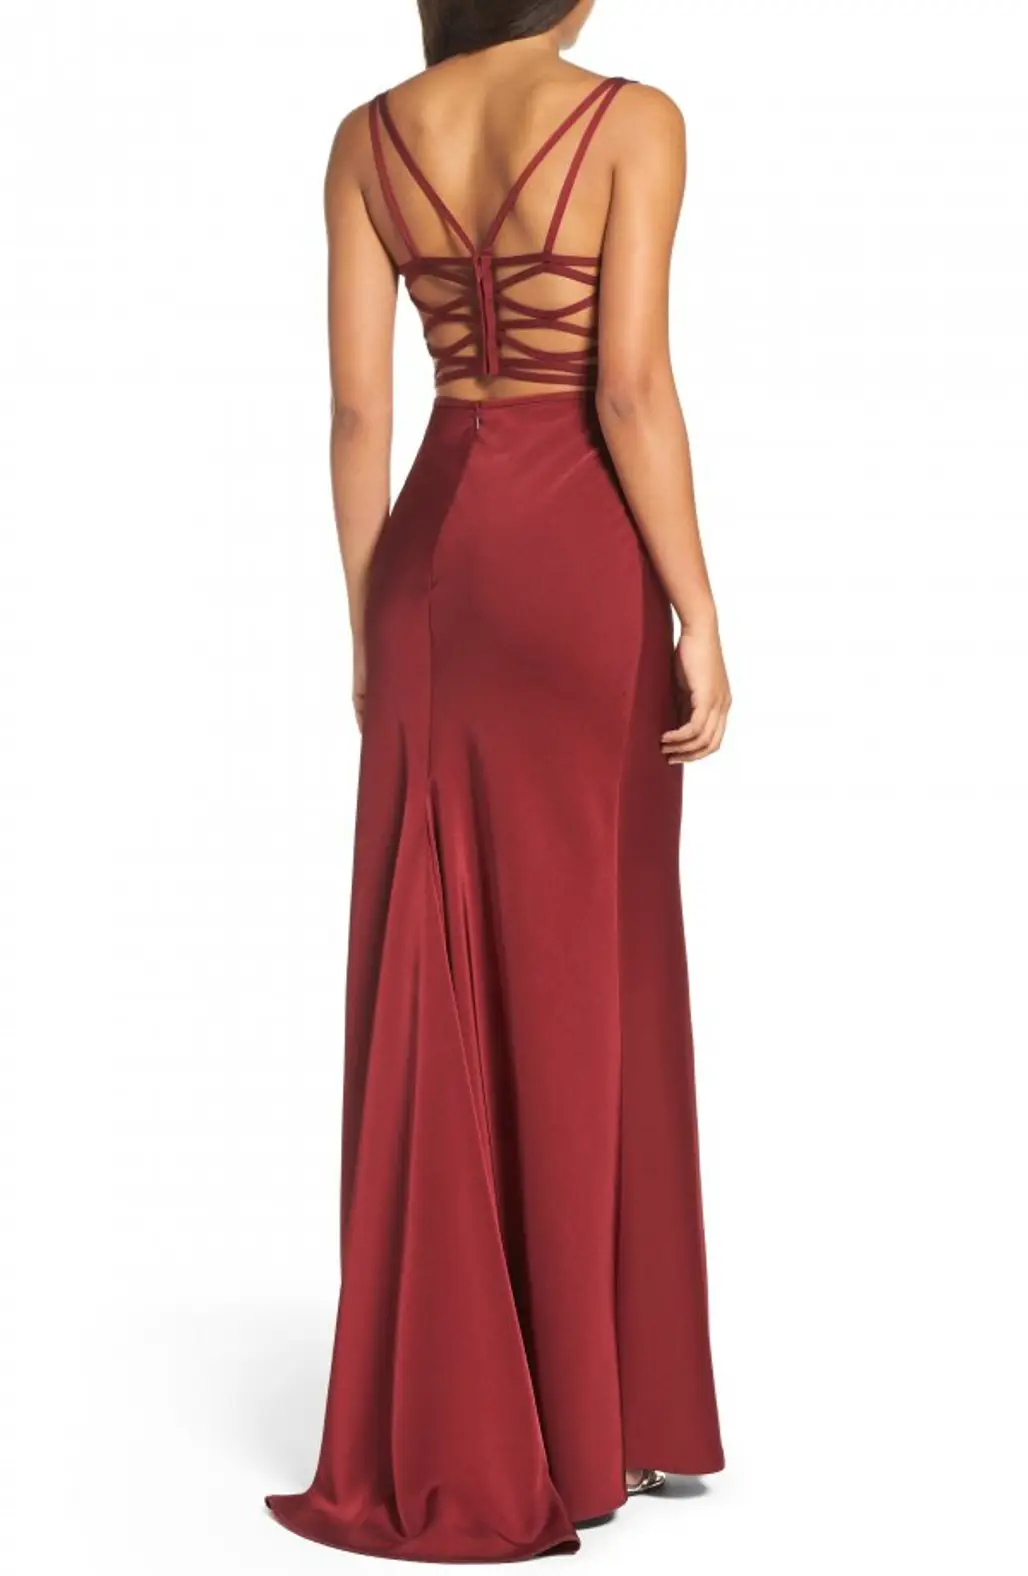 dress, clothing, day dress, woman, gown,